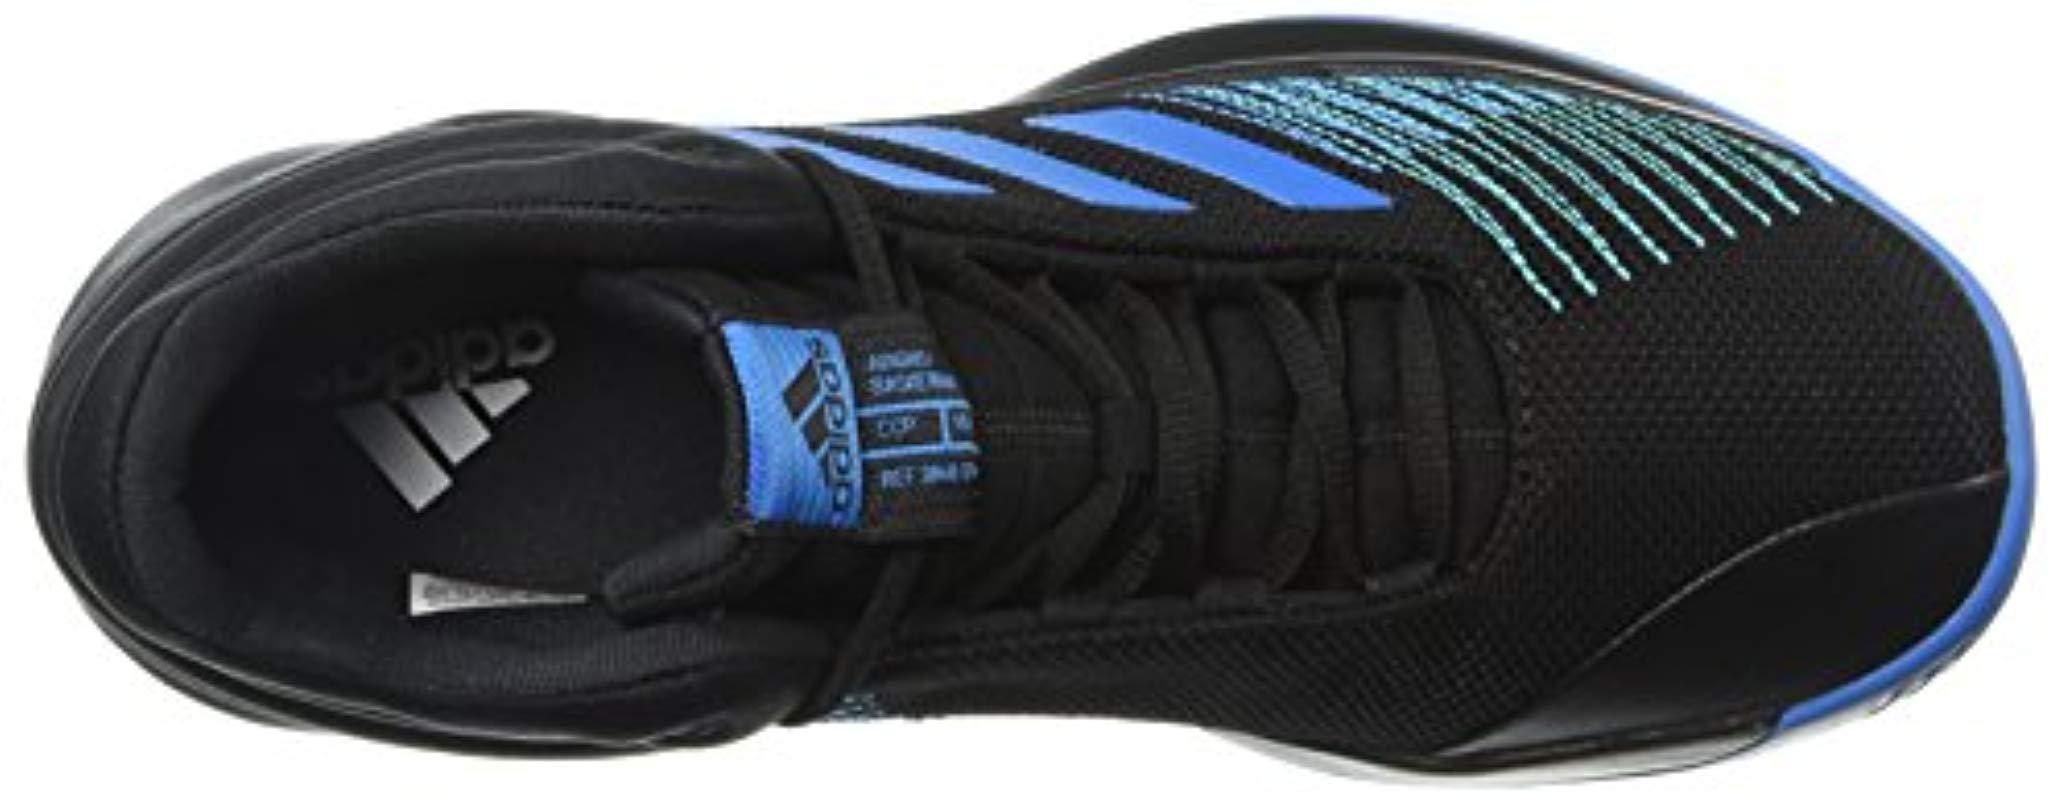 adidas Synthetic Pro Spark 2018 Basketball Shoe in Black/Bright Blue/Black ( Black) for Men | Lyst